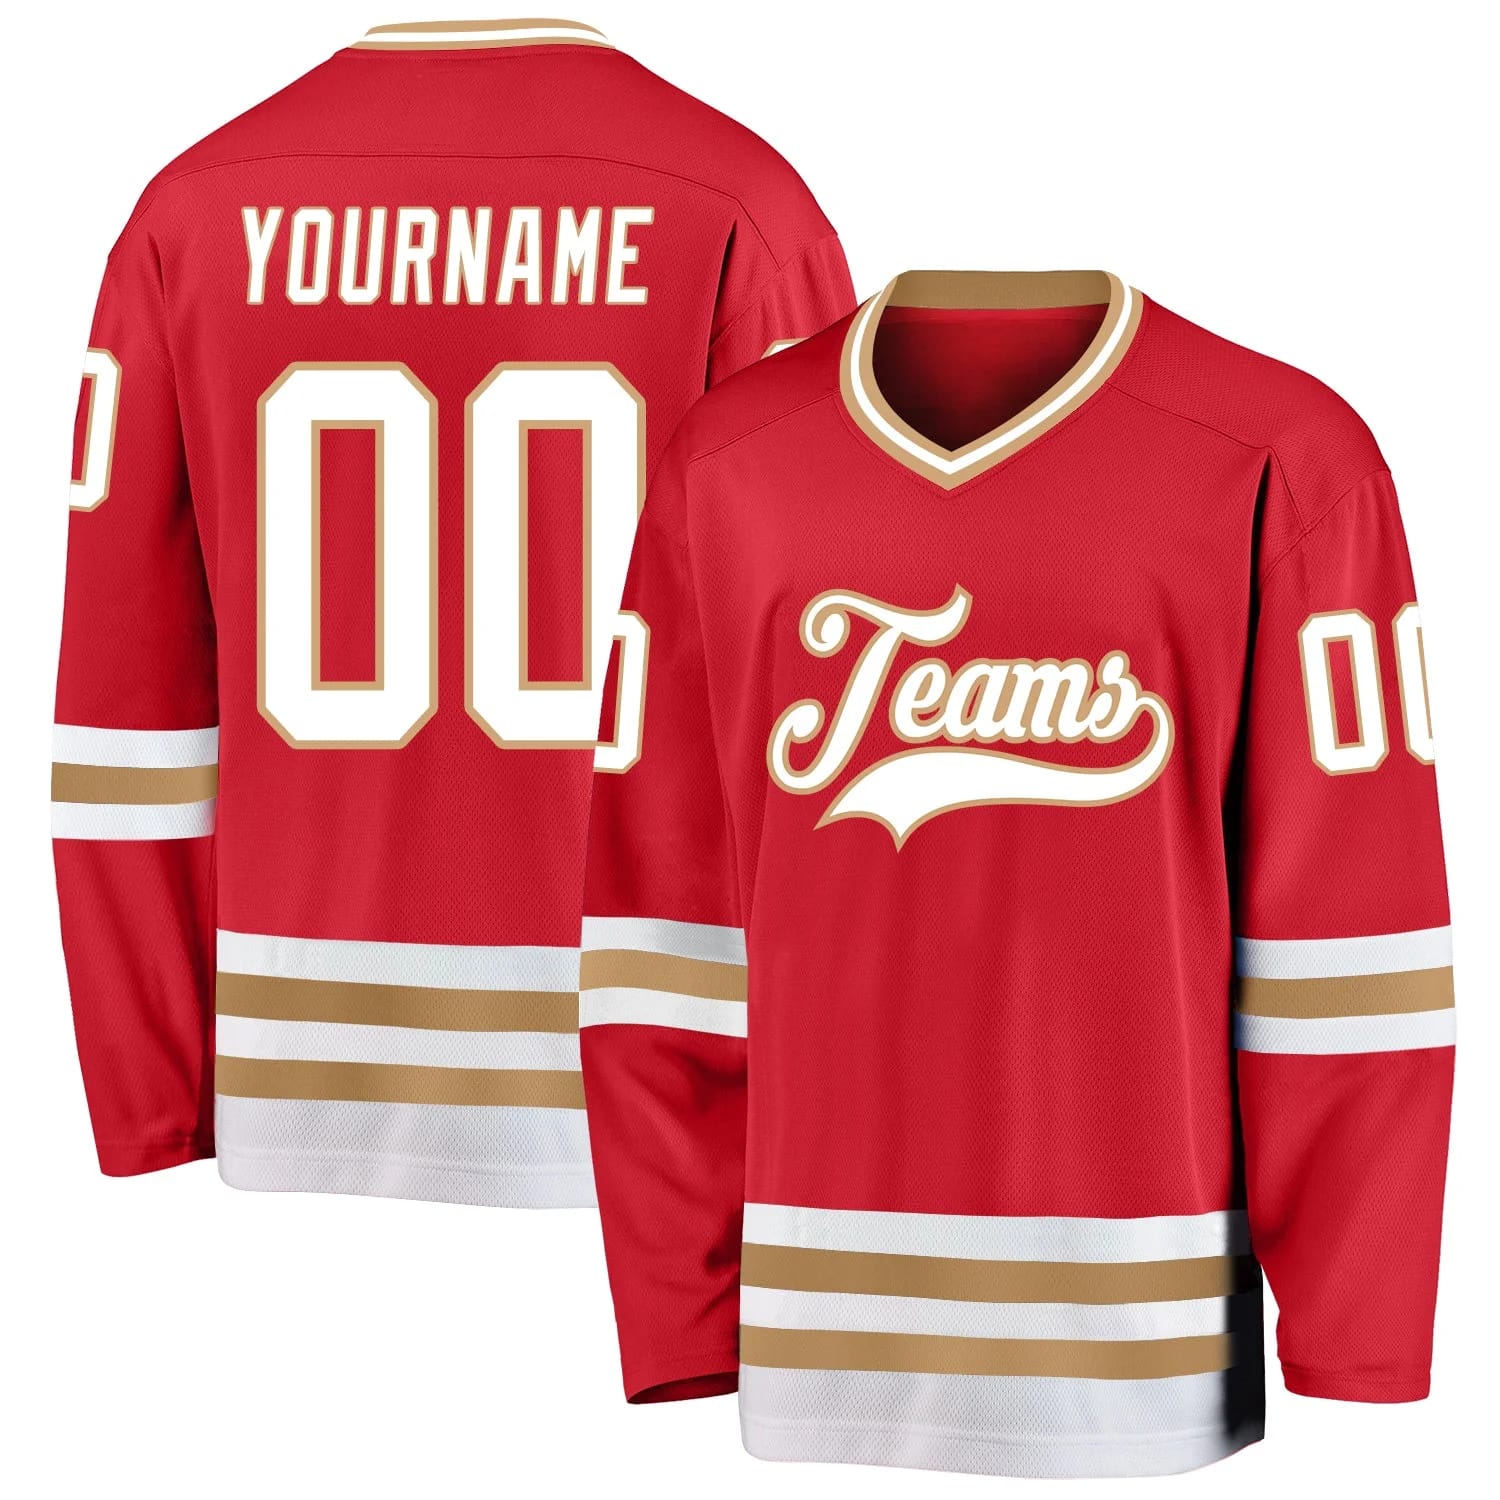 Stitched And Print Red White-Old Gold Hockey Jersey Custom